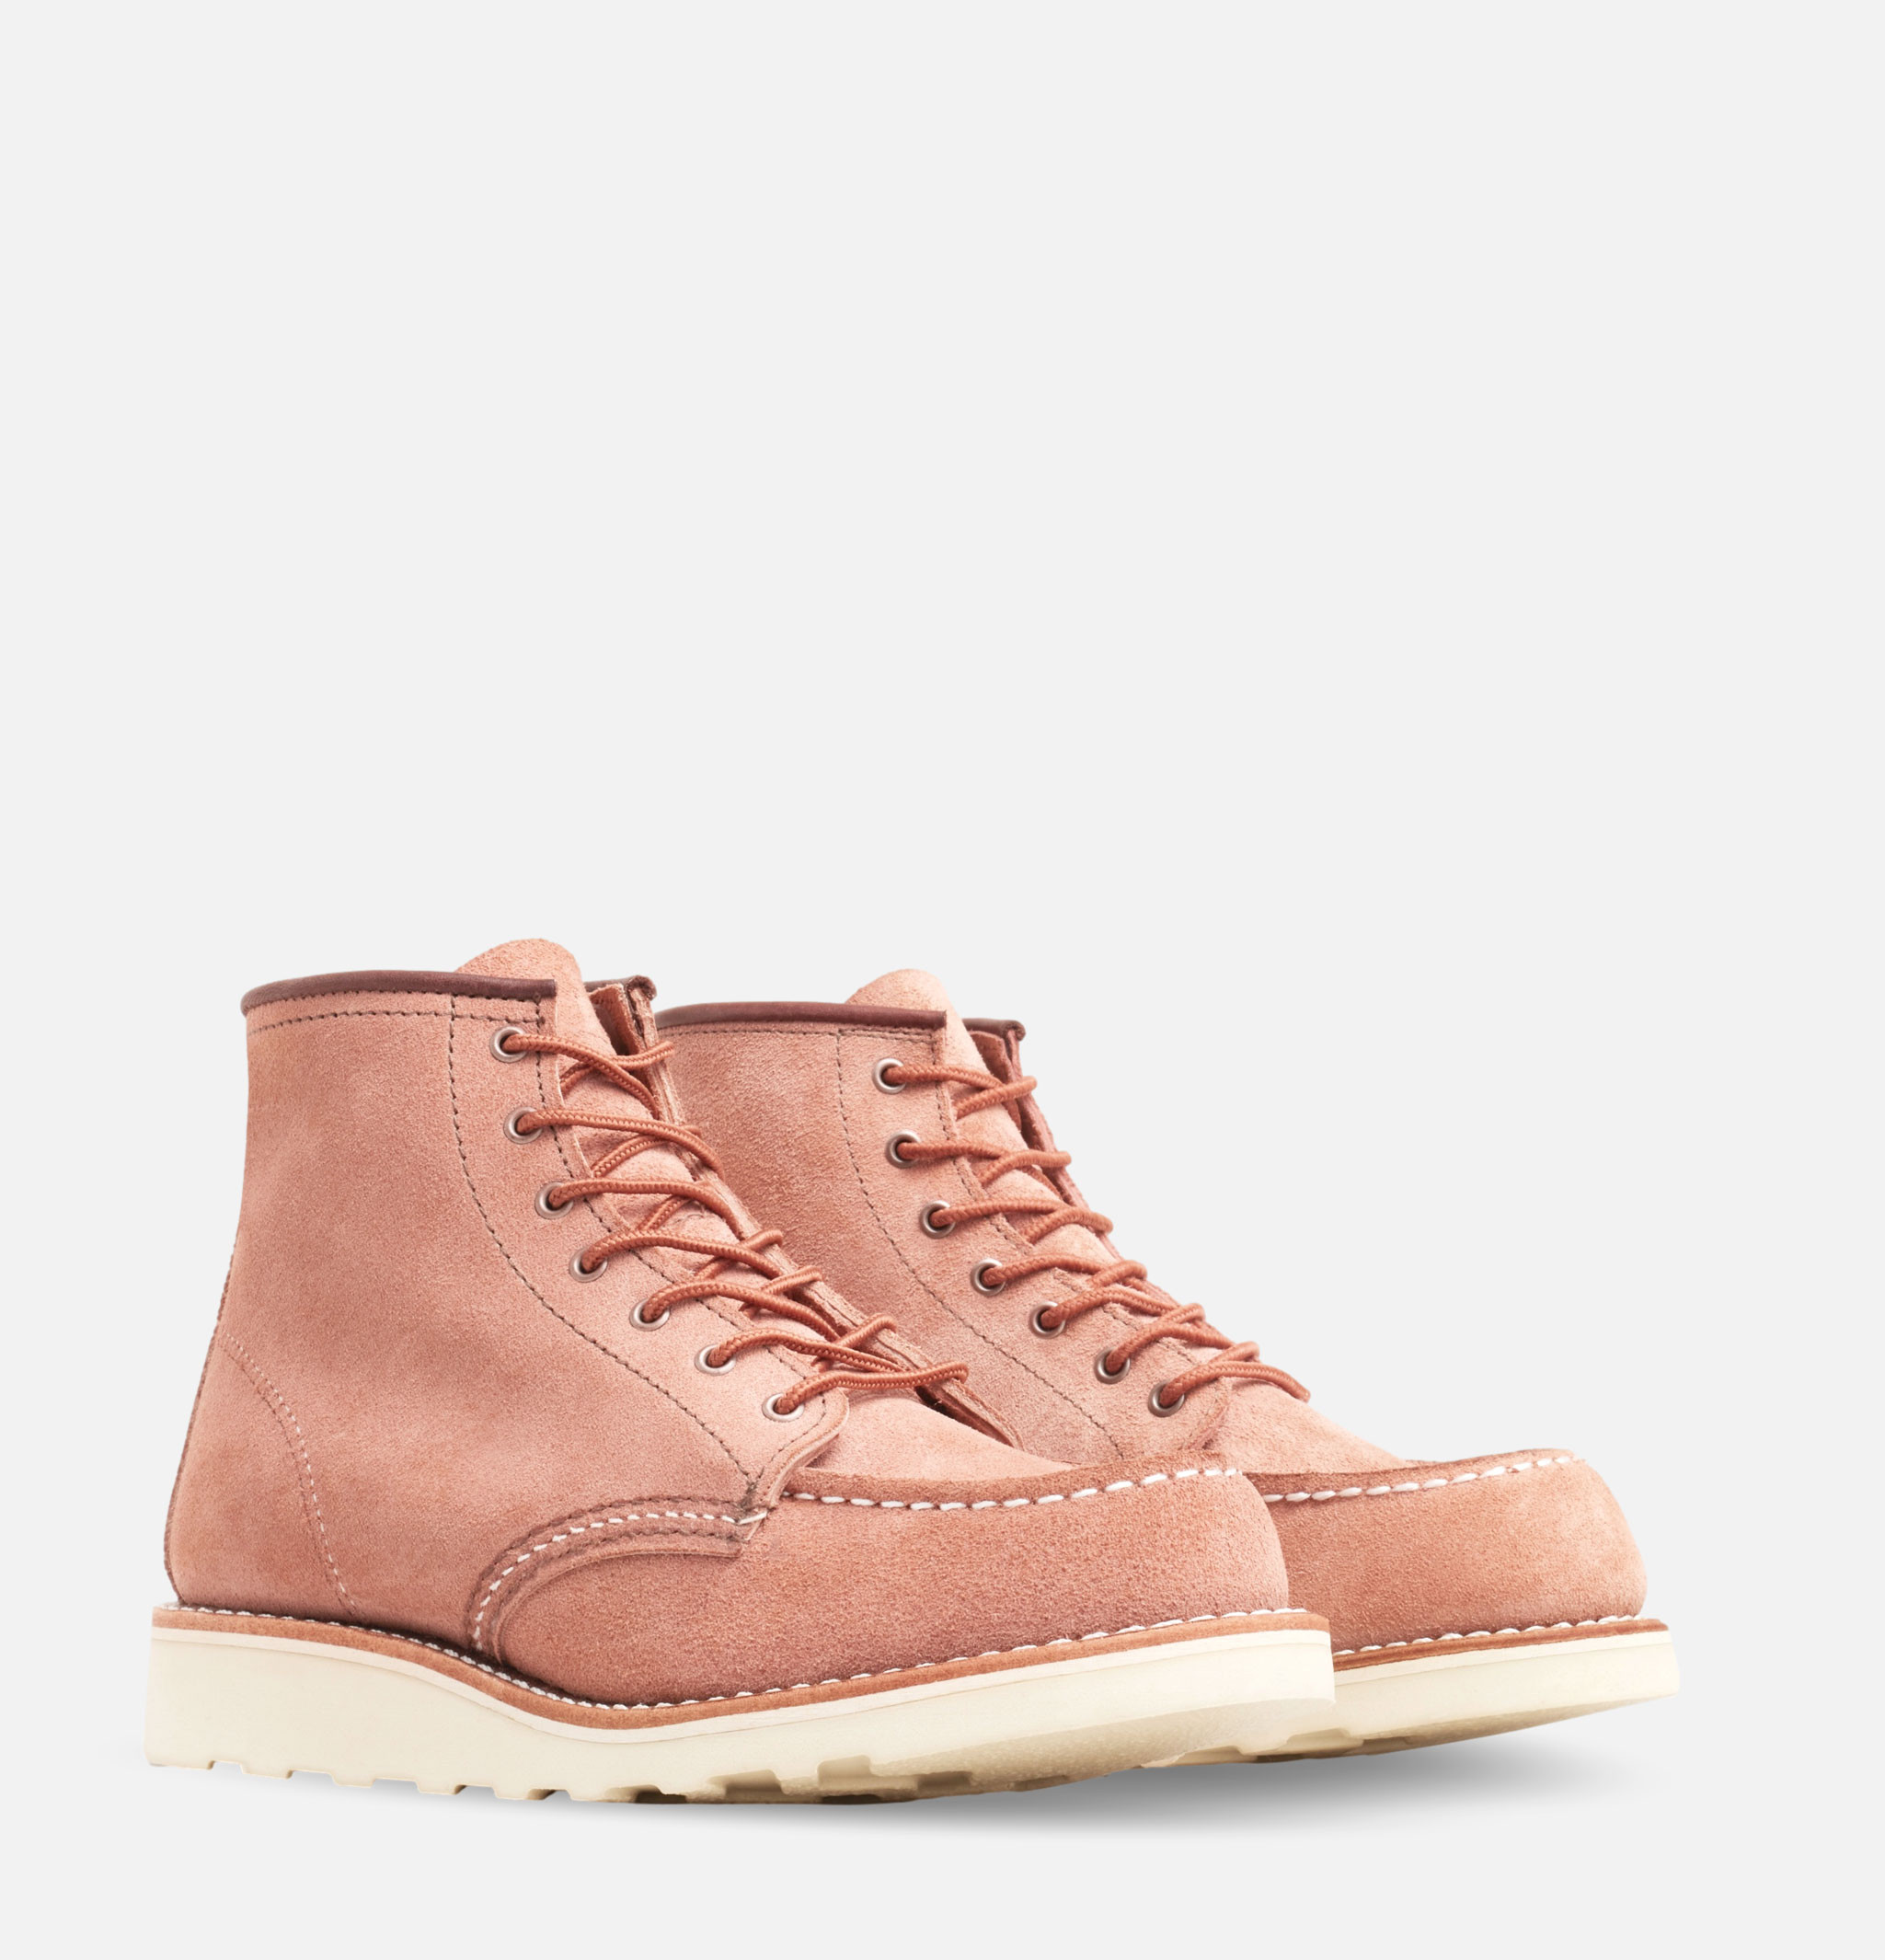 Red Wing Shoes Women 3319 Moc Toe